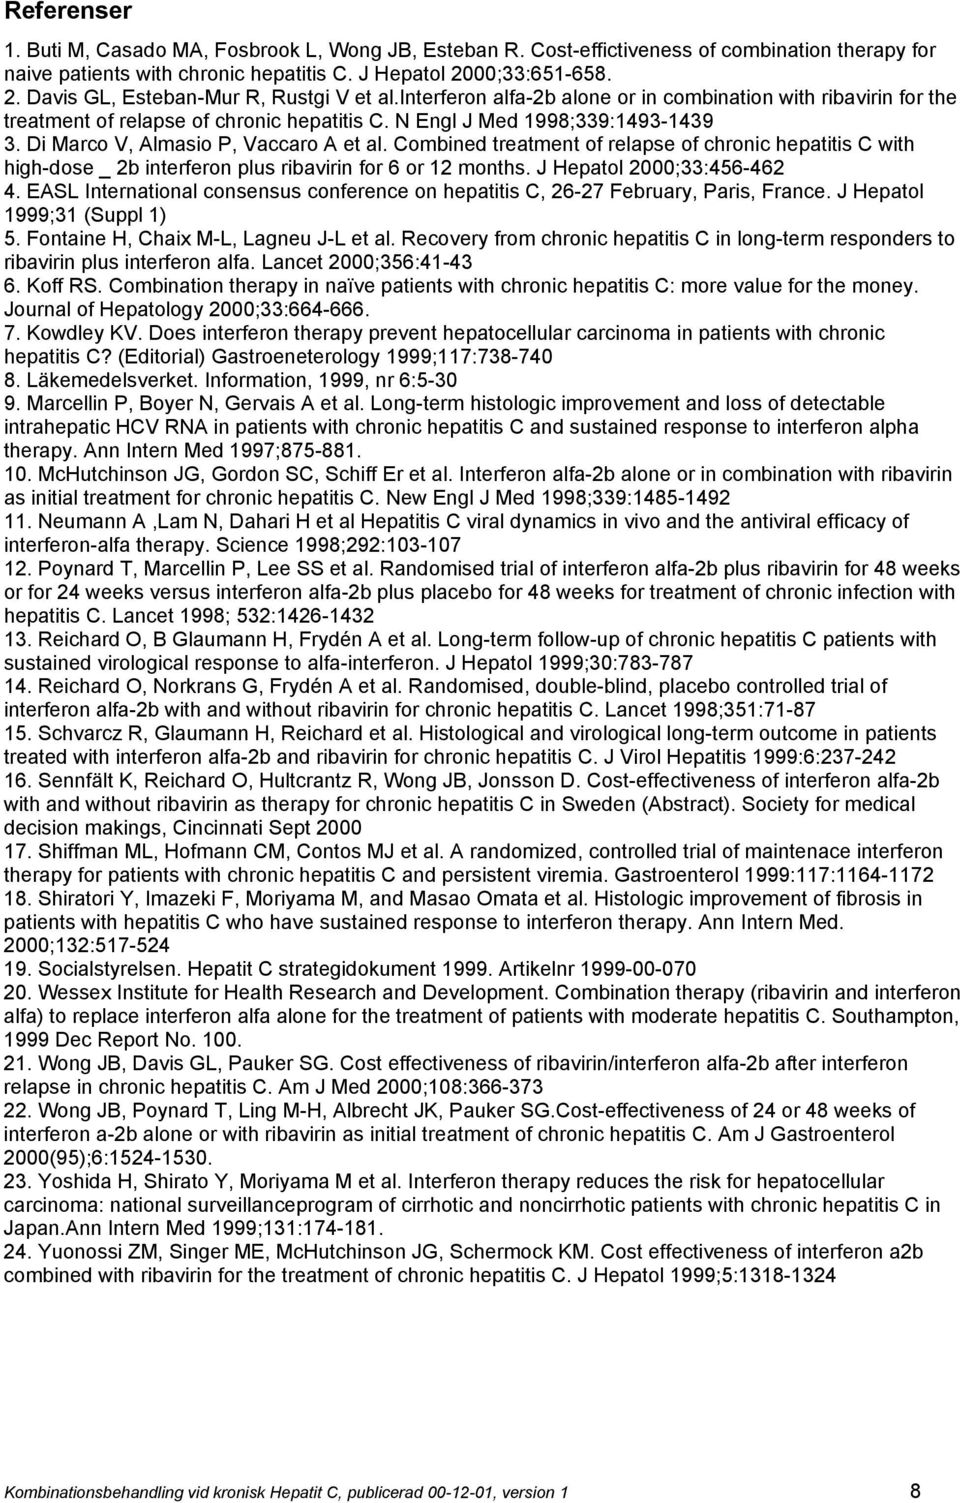 N Engl J Med 1998;339:1493-1439 3. Di Marco V, Almasio P, Vaccaro A et al. Combined treatment of relapse of chronic hepatitis C with high-dose _ 2b interferon plus ribavirin for 6 or 12 months.